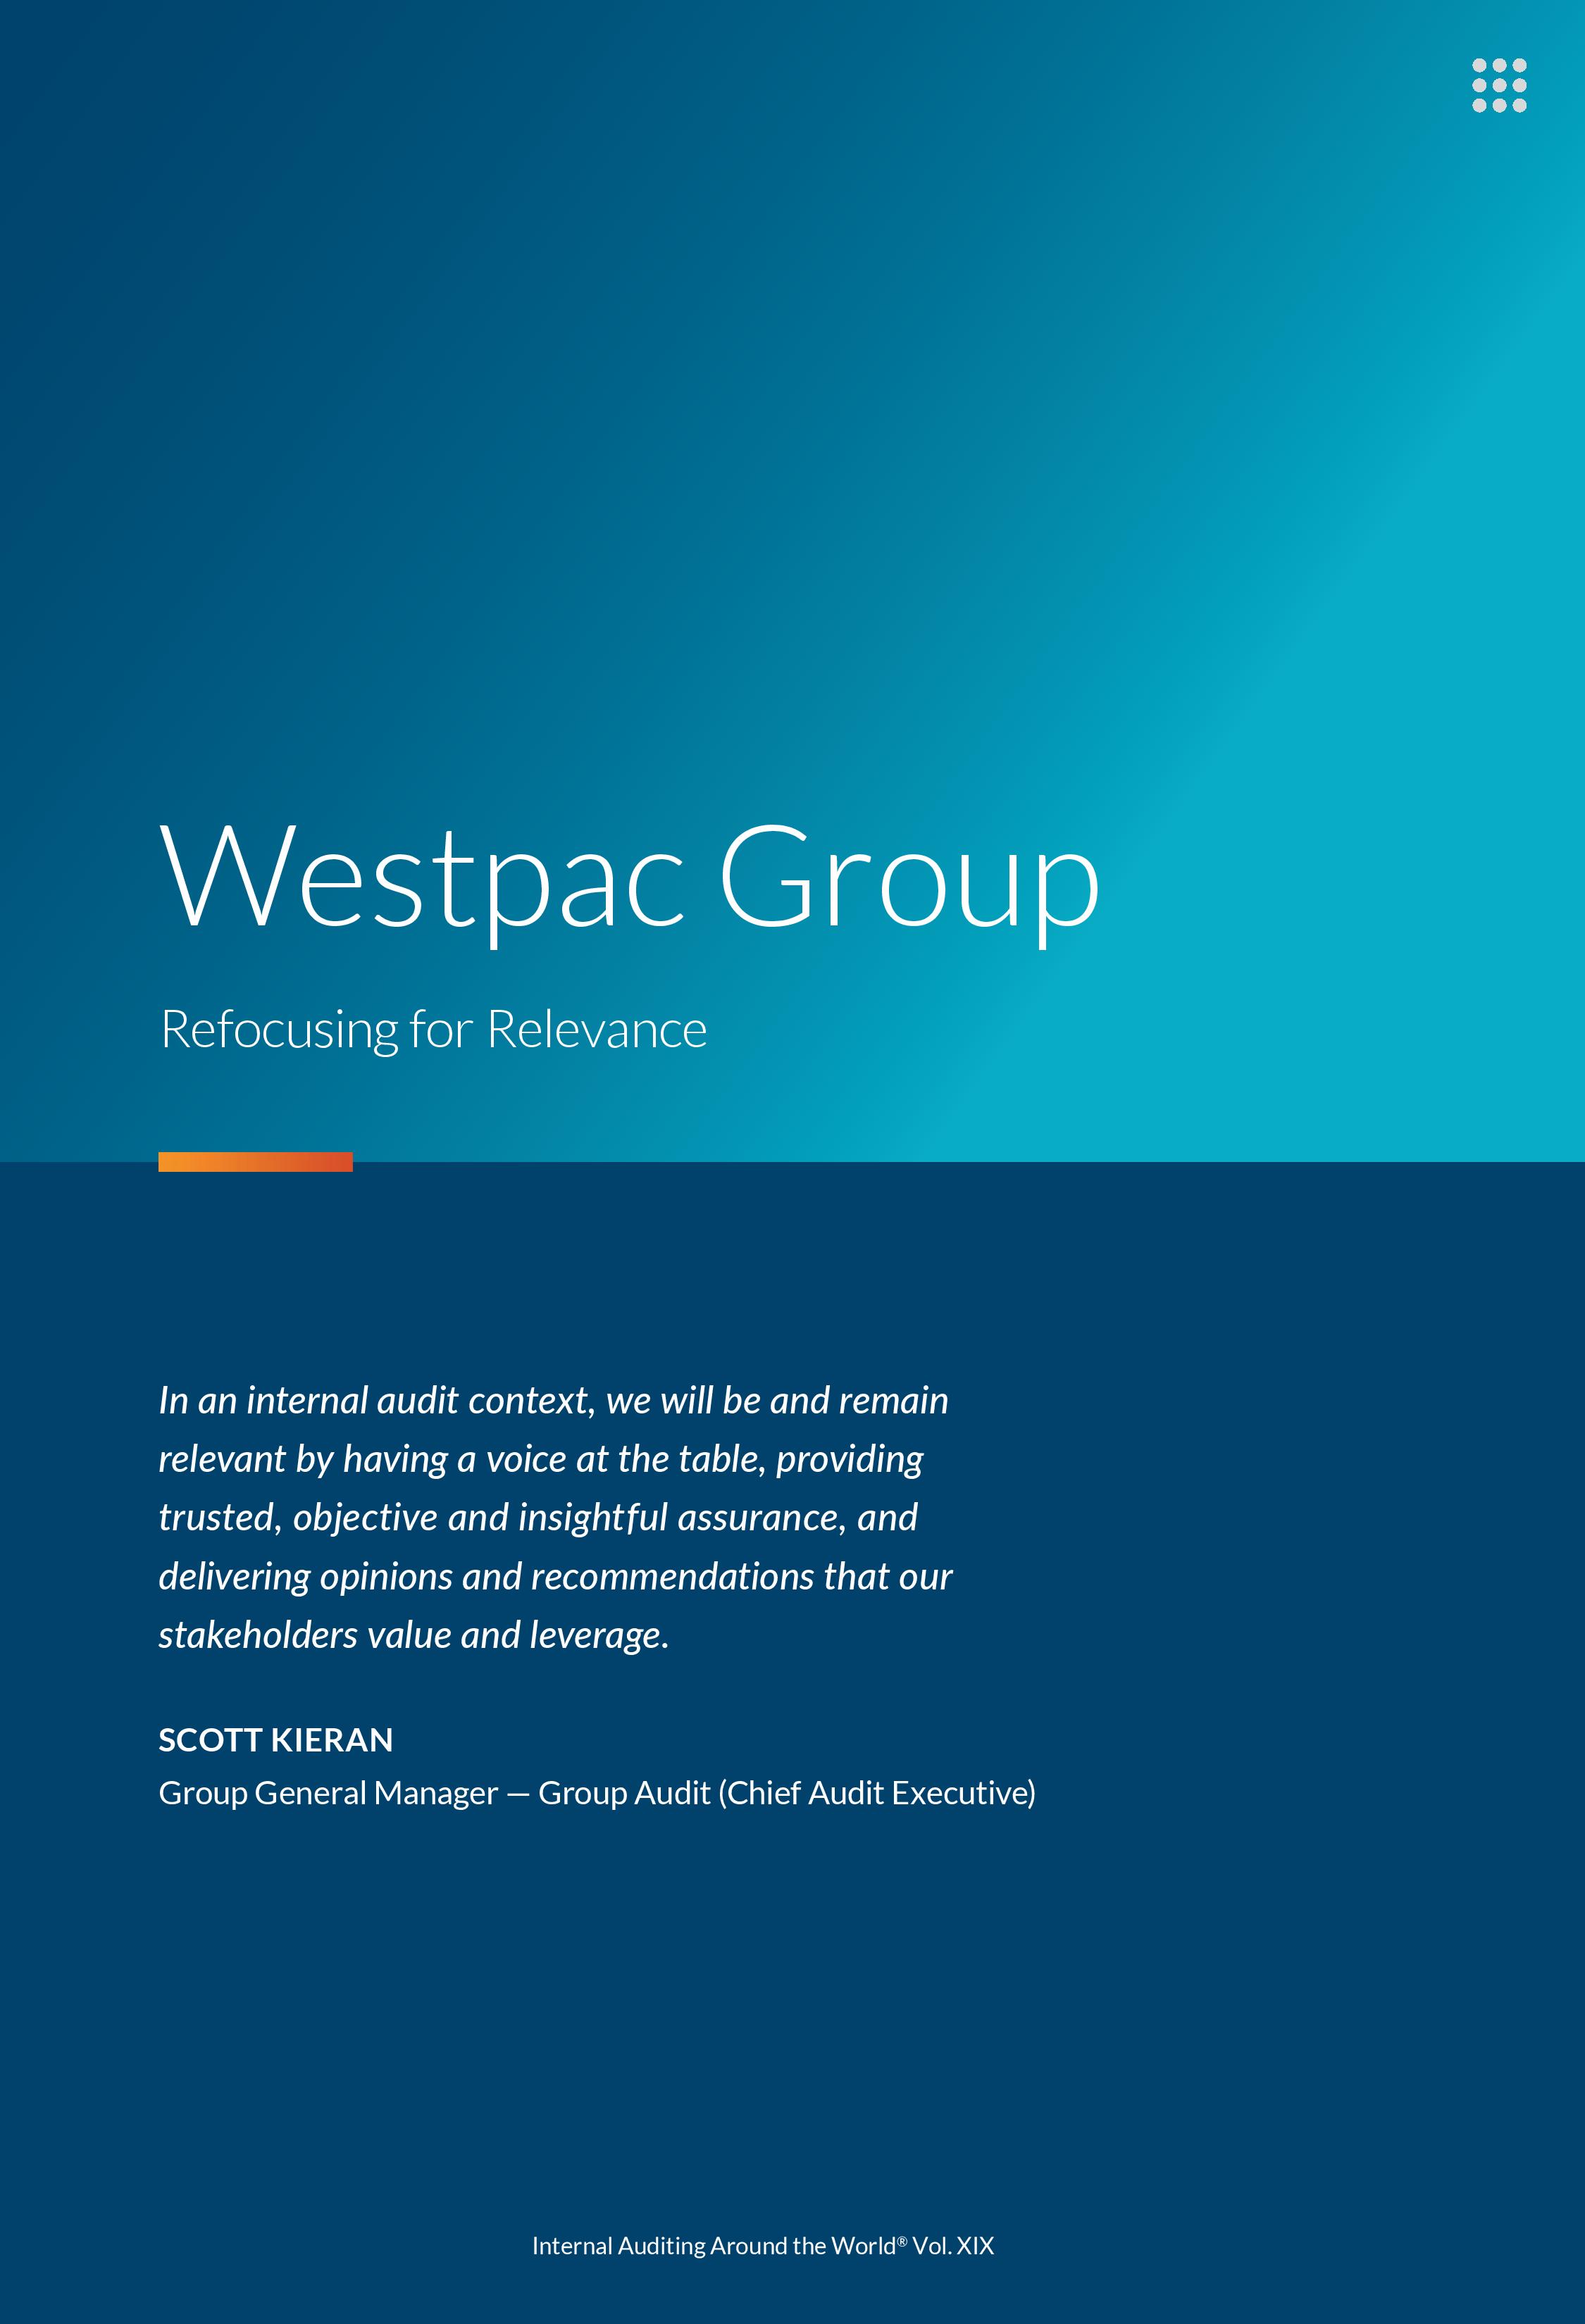 screenshot of the first page of Westpac Group